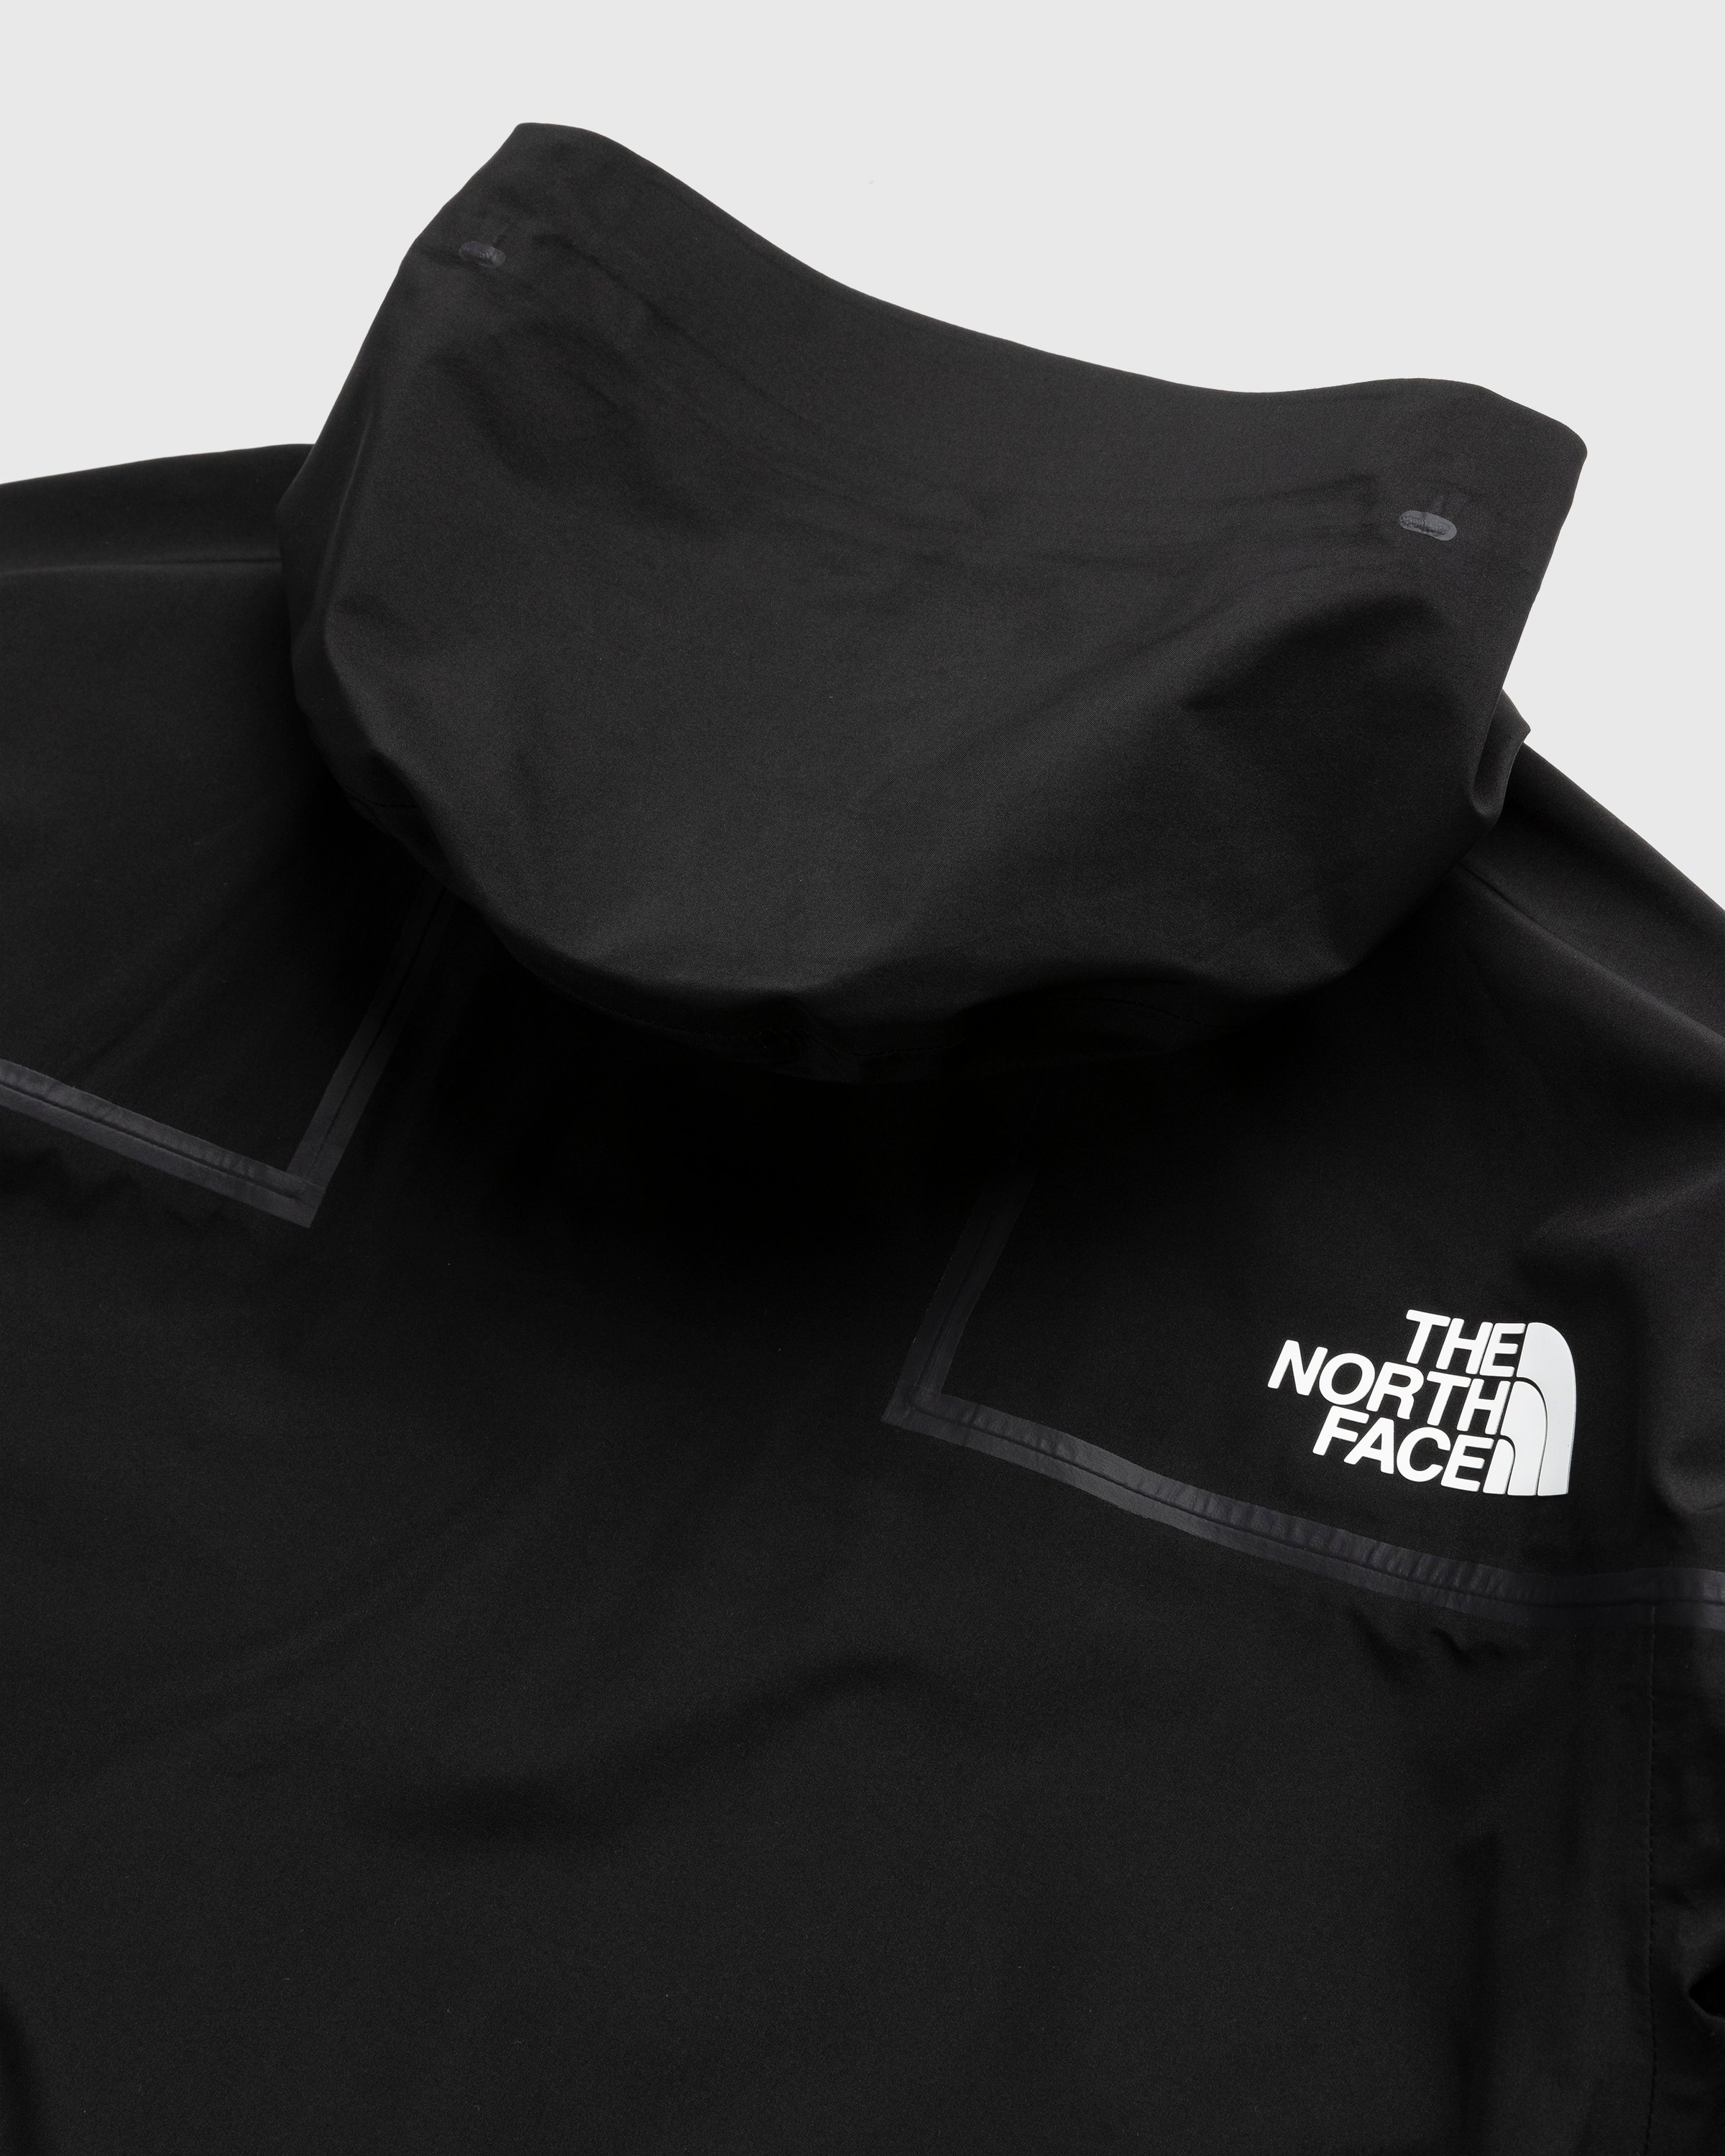 The North Face - RMST Mountain Light Futurelight Triclimate Jacket Black - Clothing - Black - Image 5